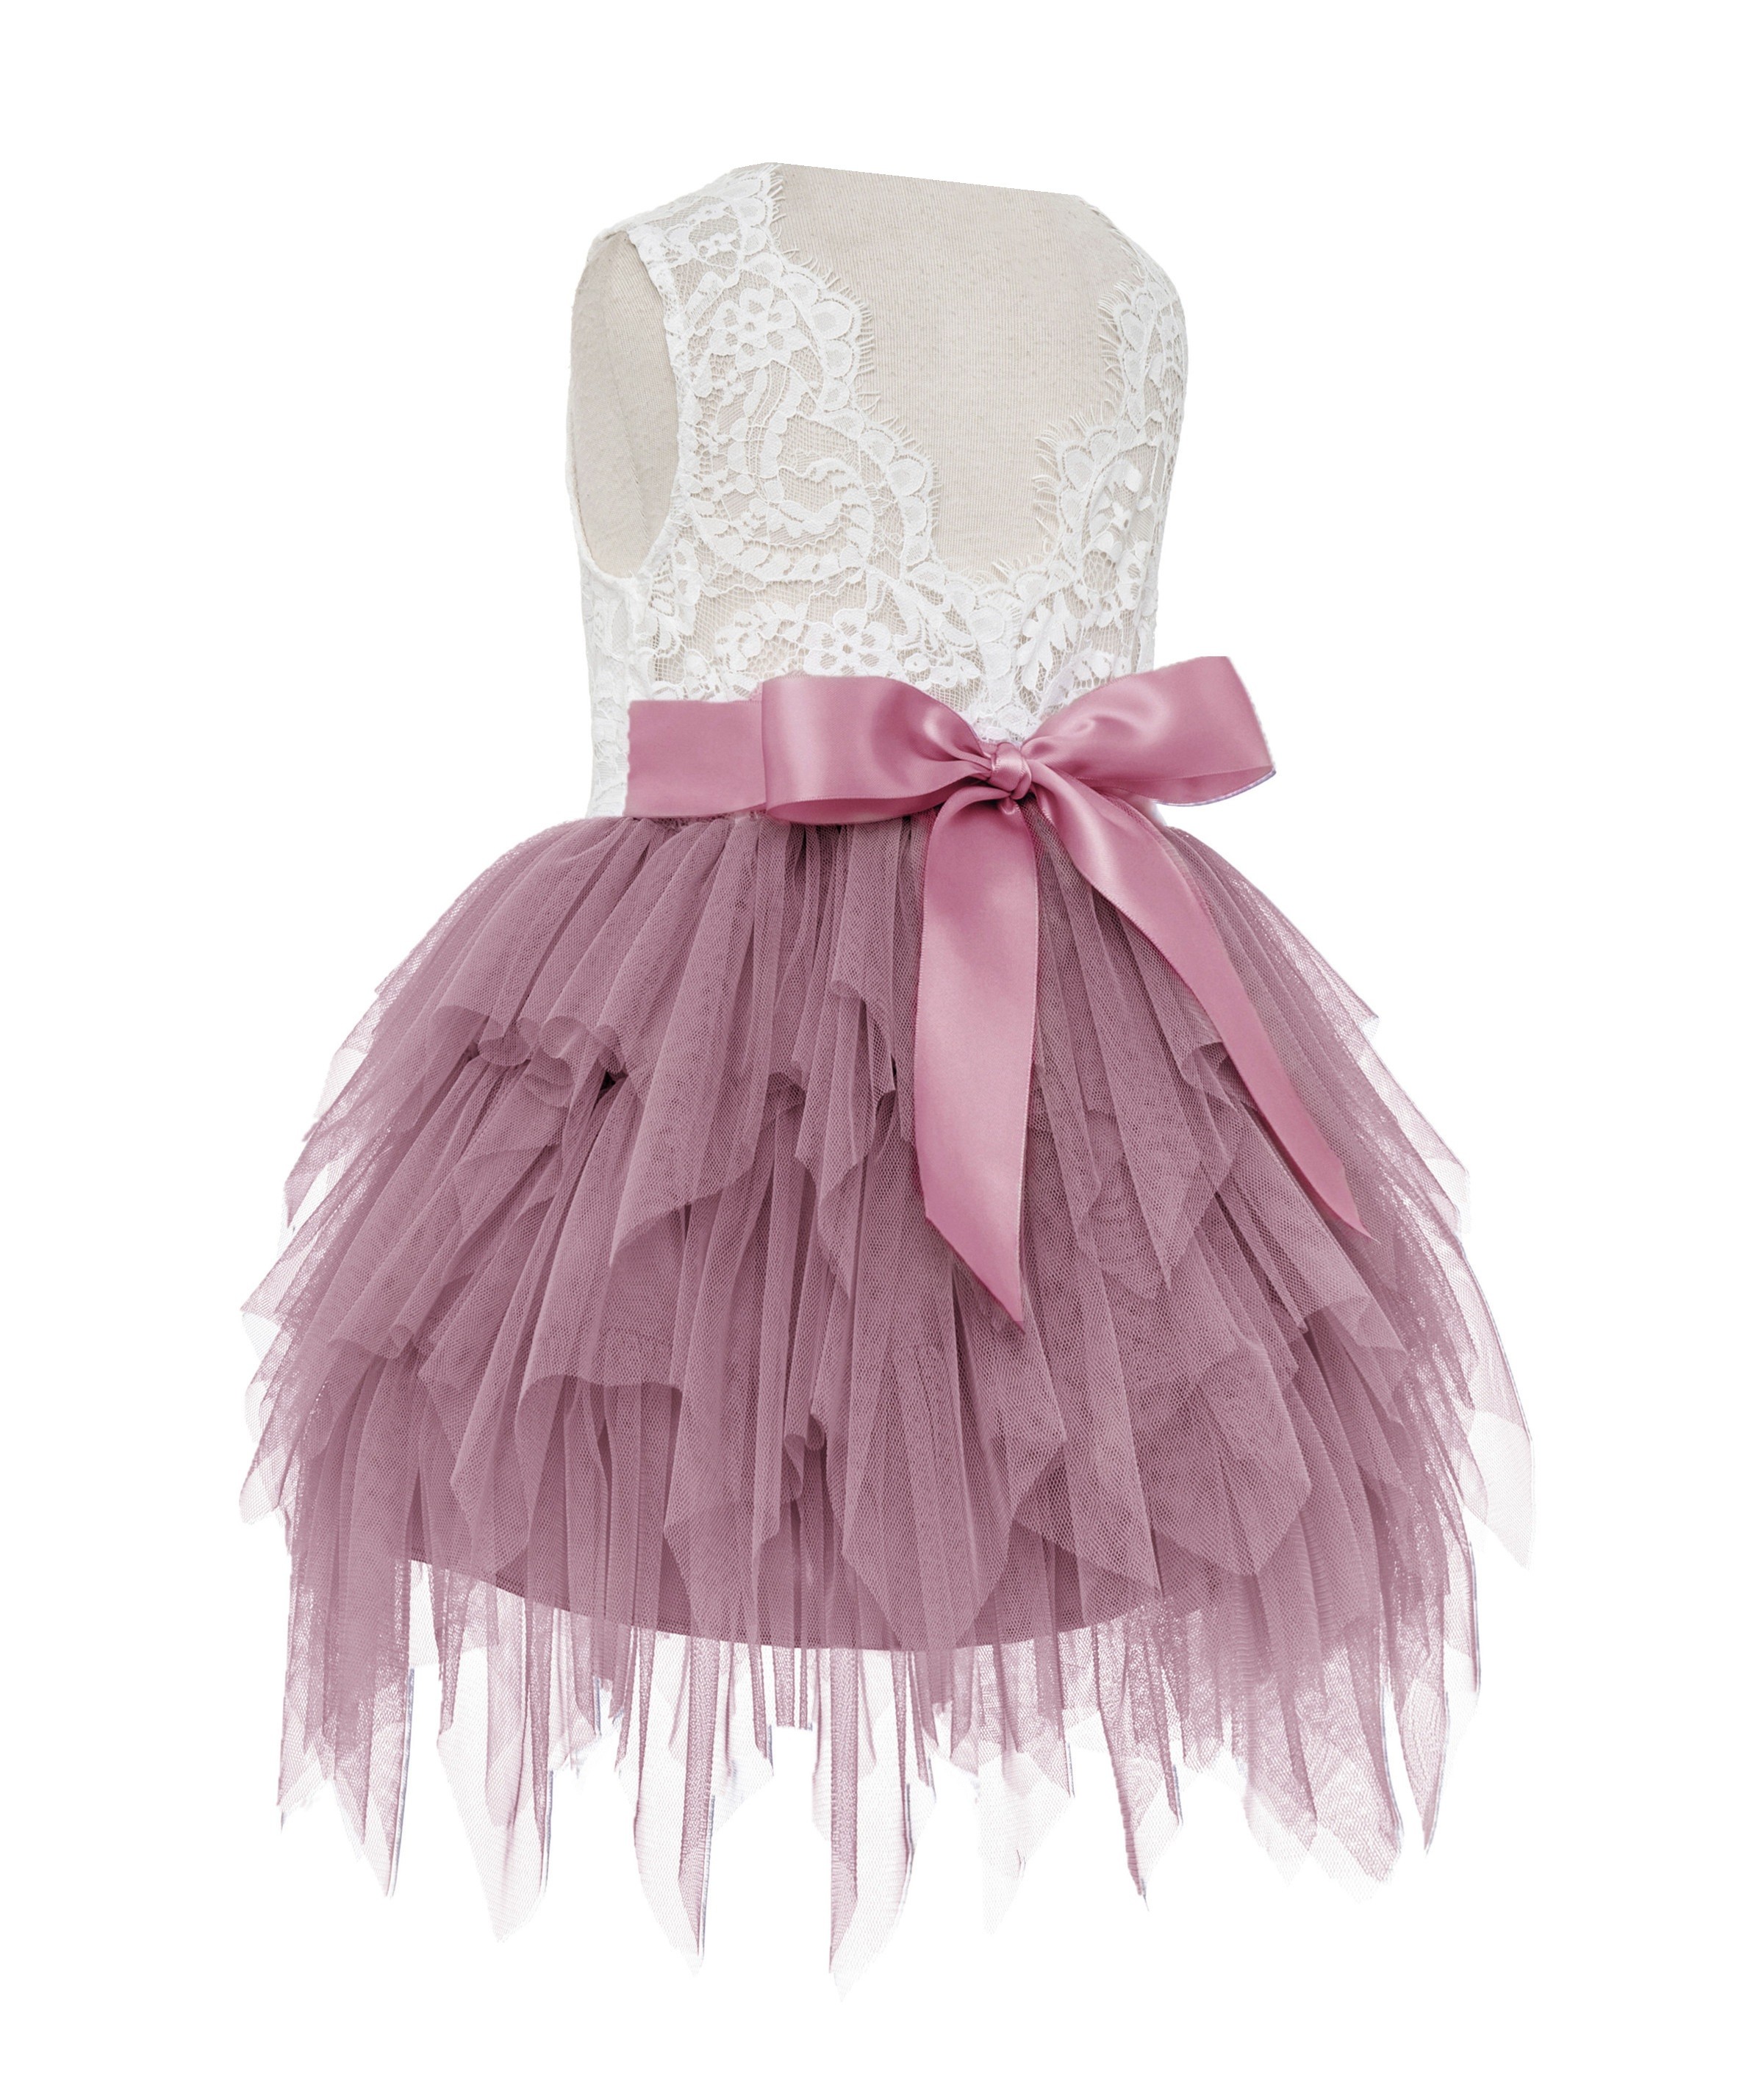 Mauve Tiered Tulle Flower Girl Dress Lace Back Dress LG6